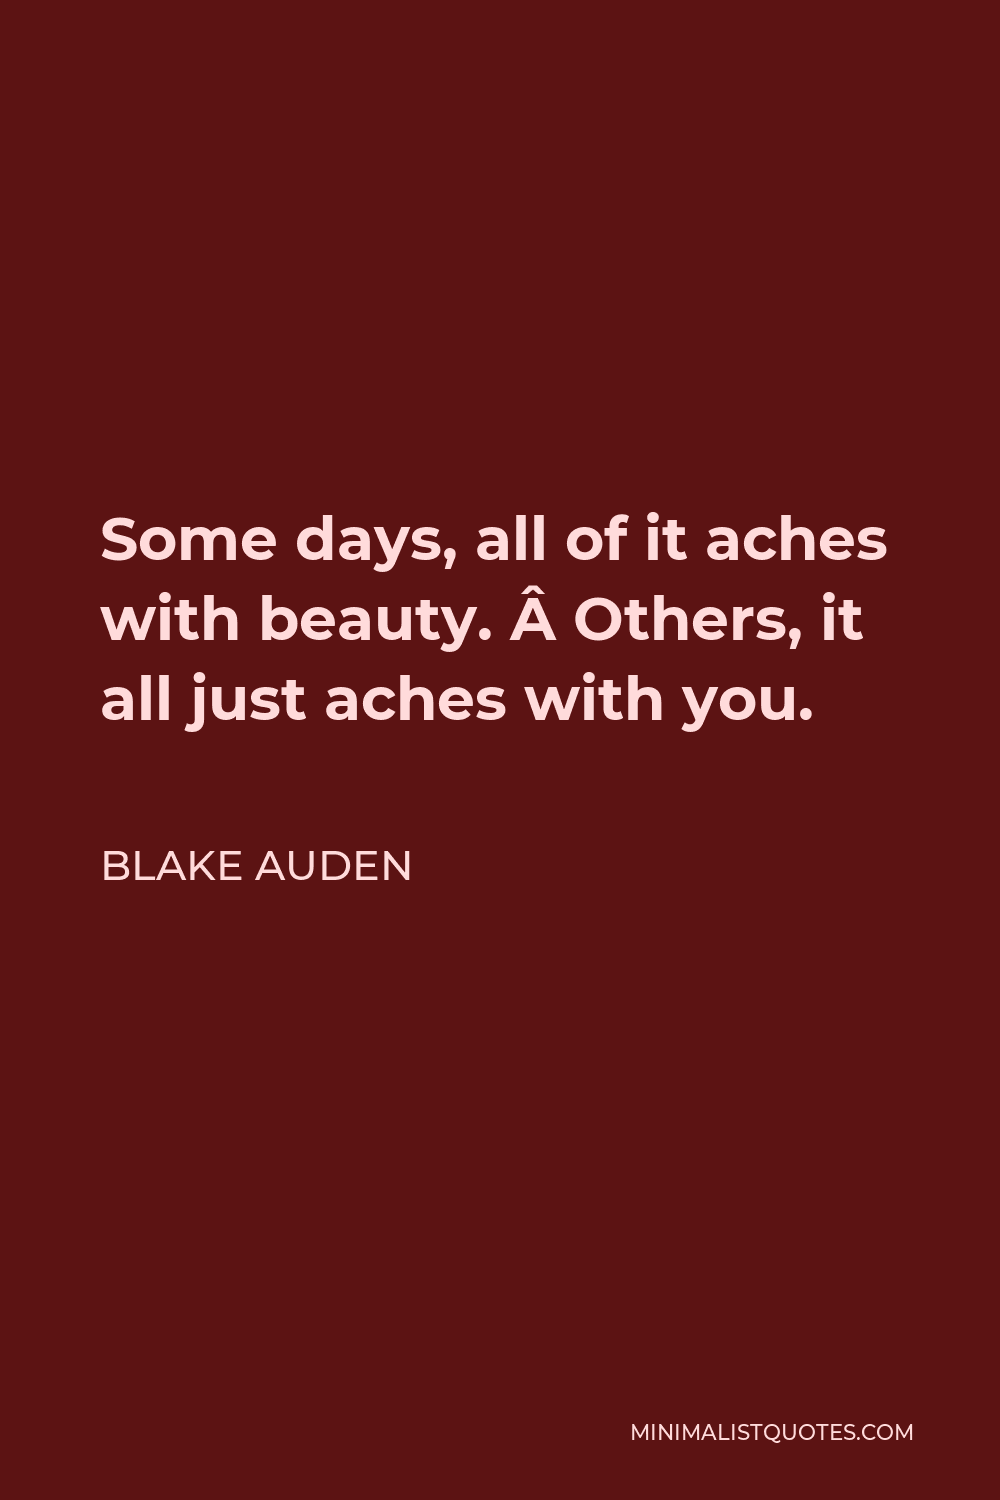 Blake Auden Quote - Some days, all of it aches with beauty.  Others, it all just aches with you.